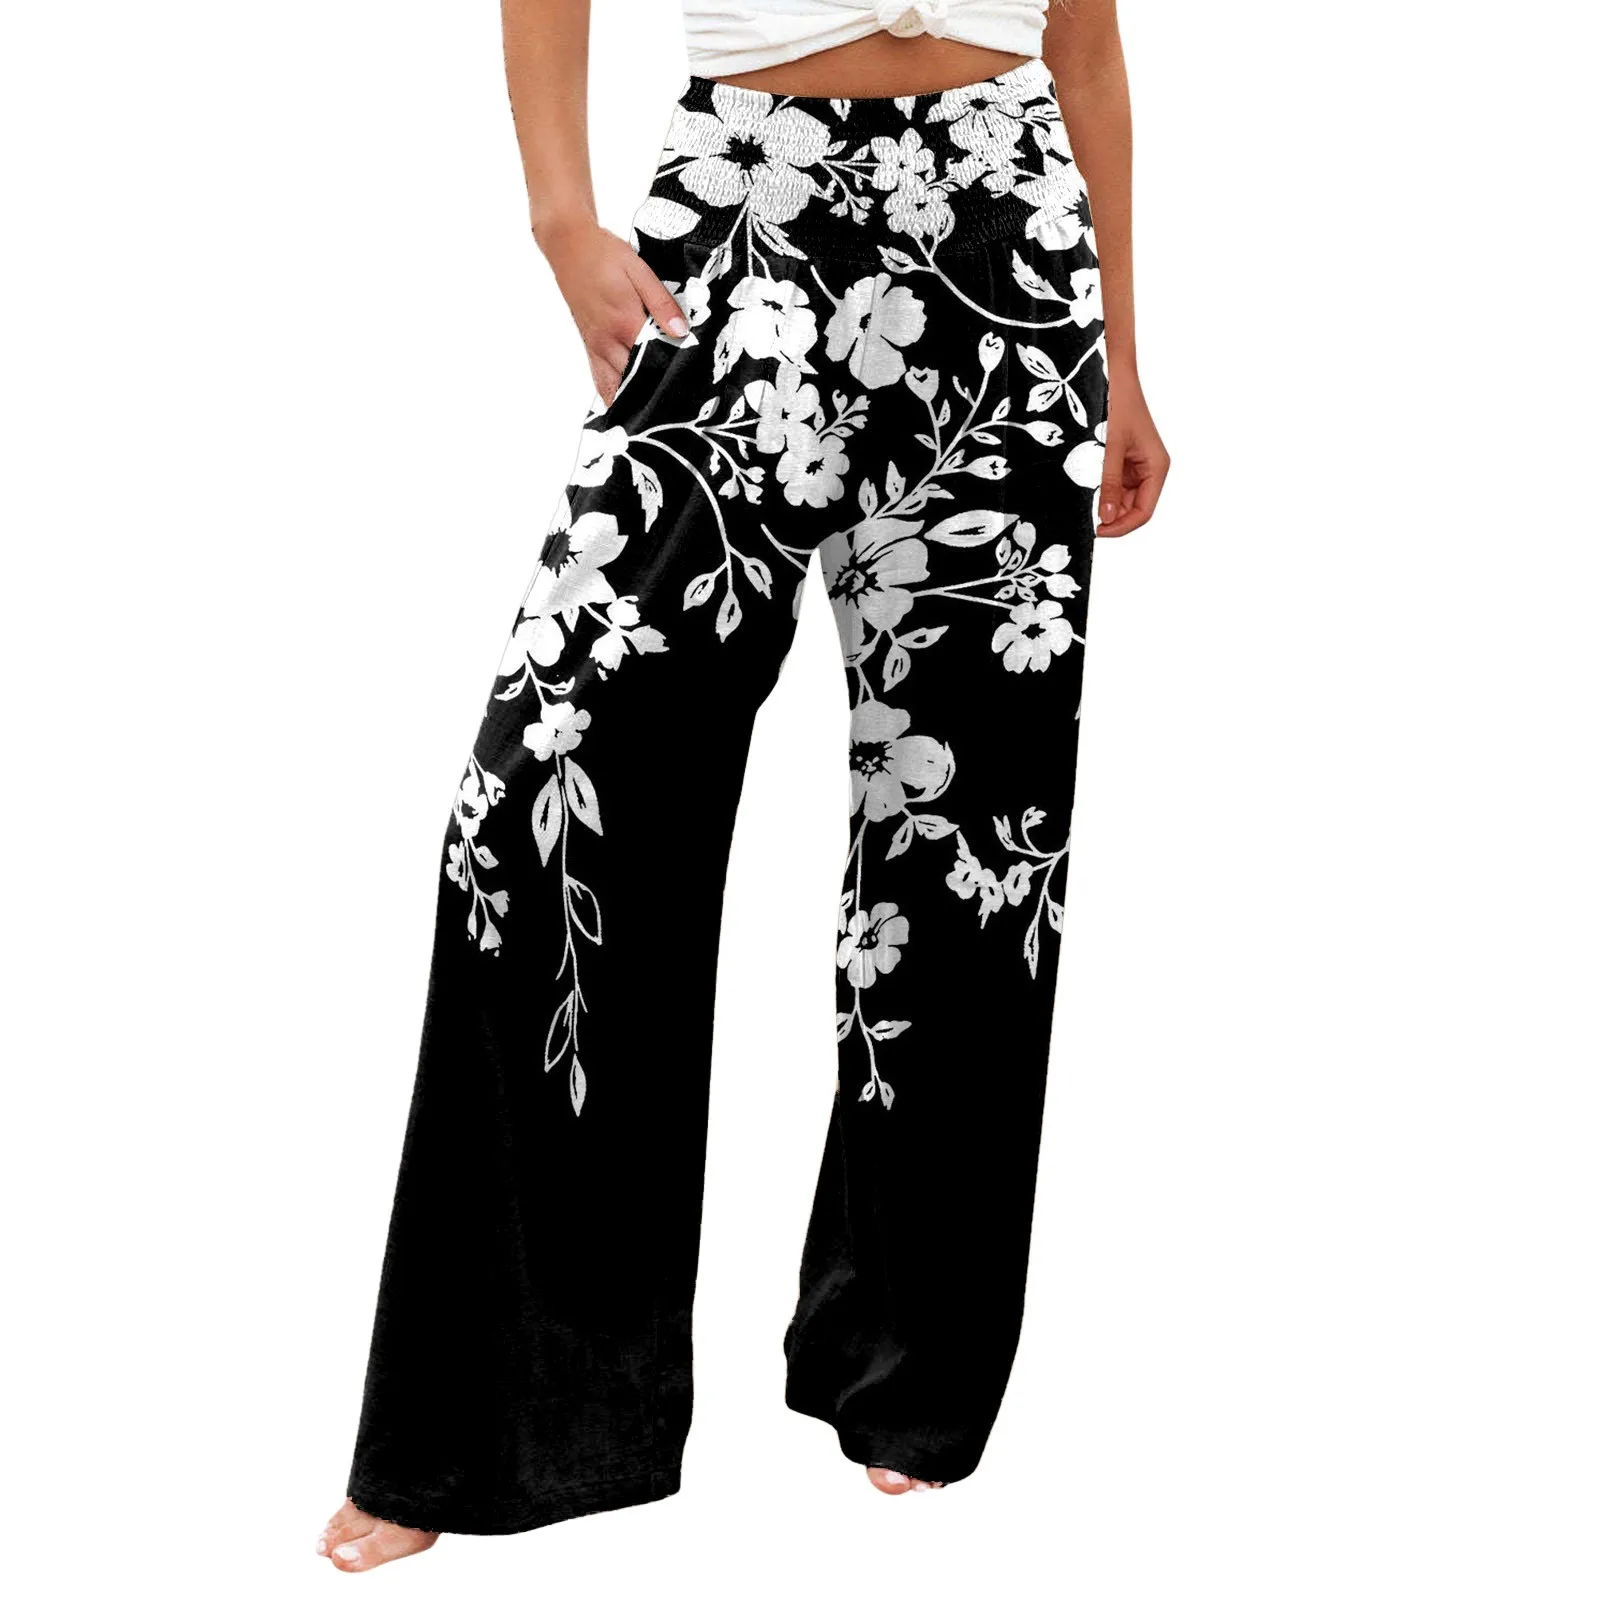 Boho Harem Pants Summer Casual Loose Wide Leg Trousers with Pockets Floral Printed Elastic High Waist Long Pants Dance Trousers